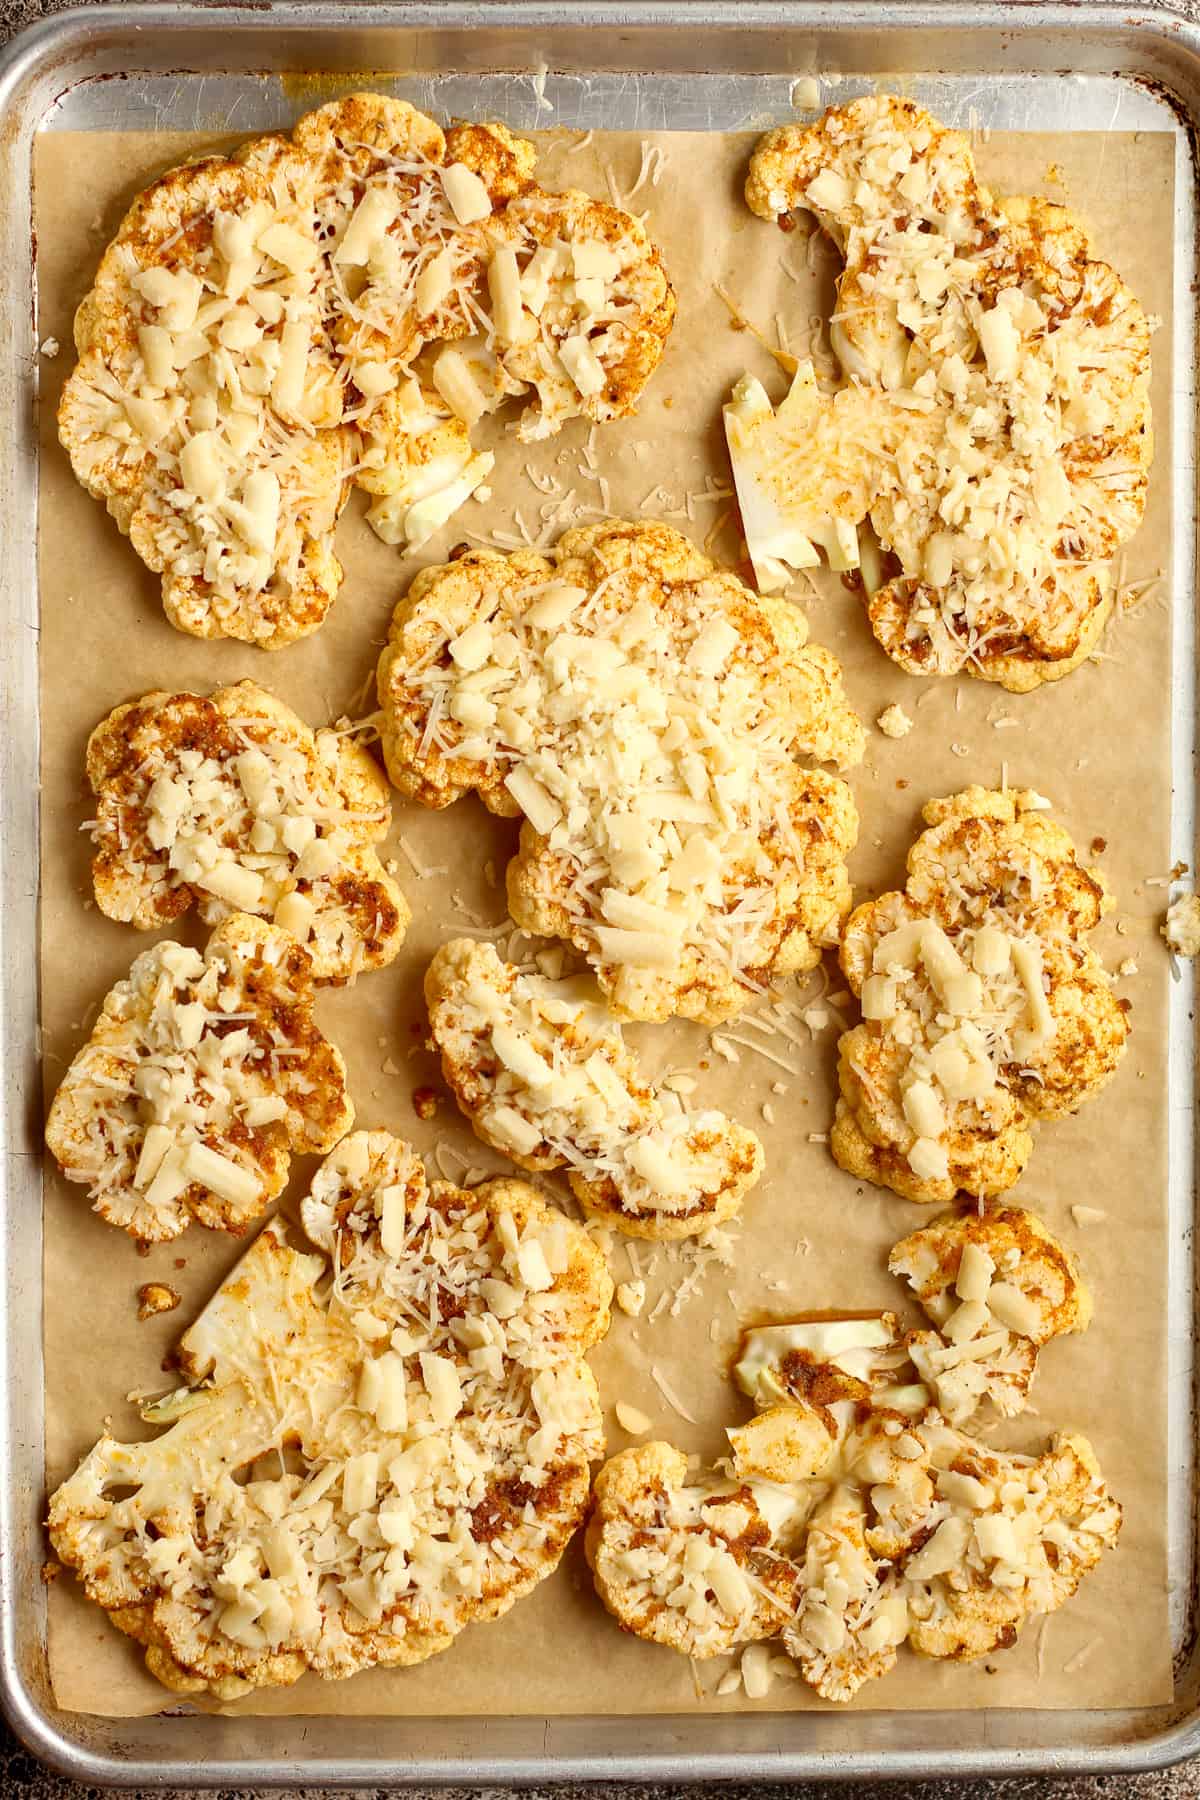 A pan of the cauliflower steaks with shredded cheese on top, before finishing the roasting.